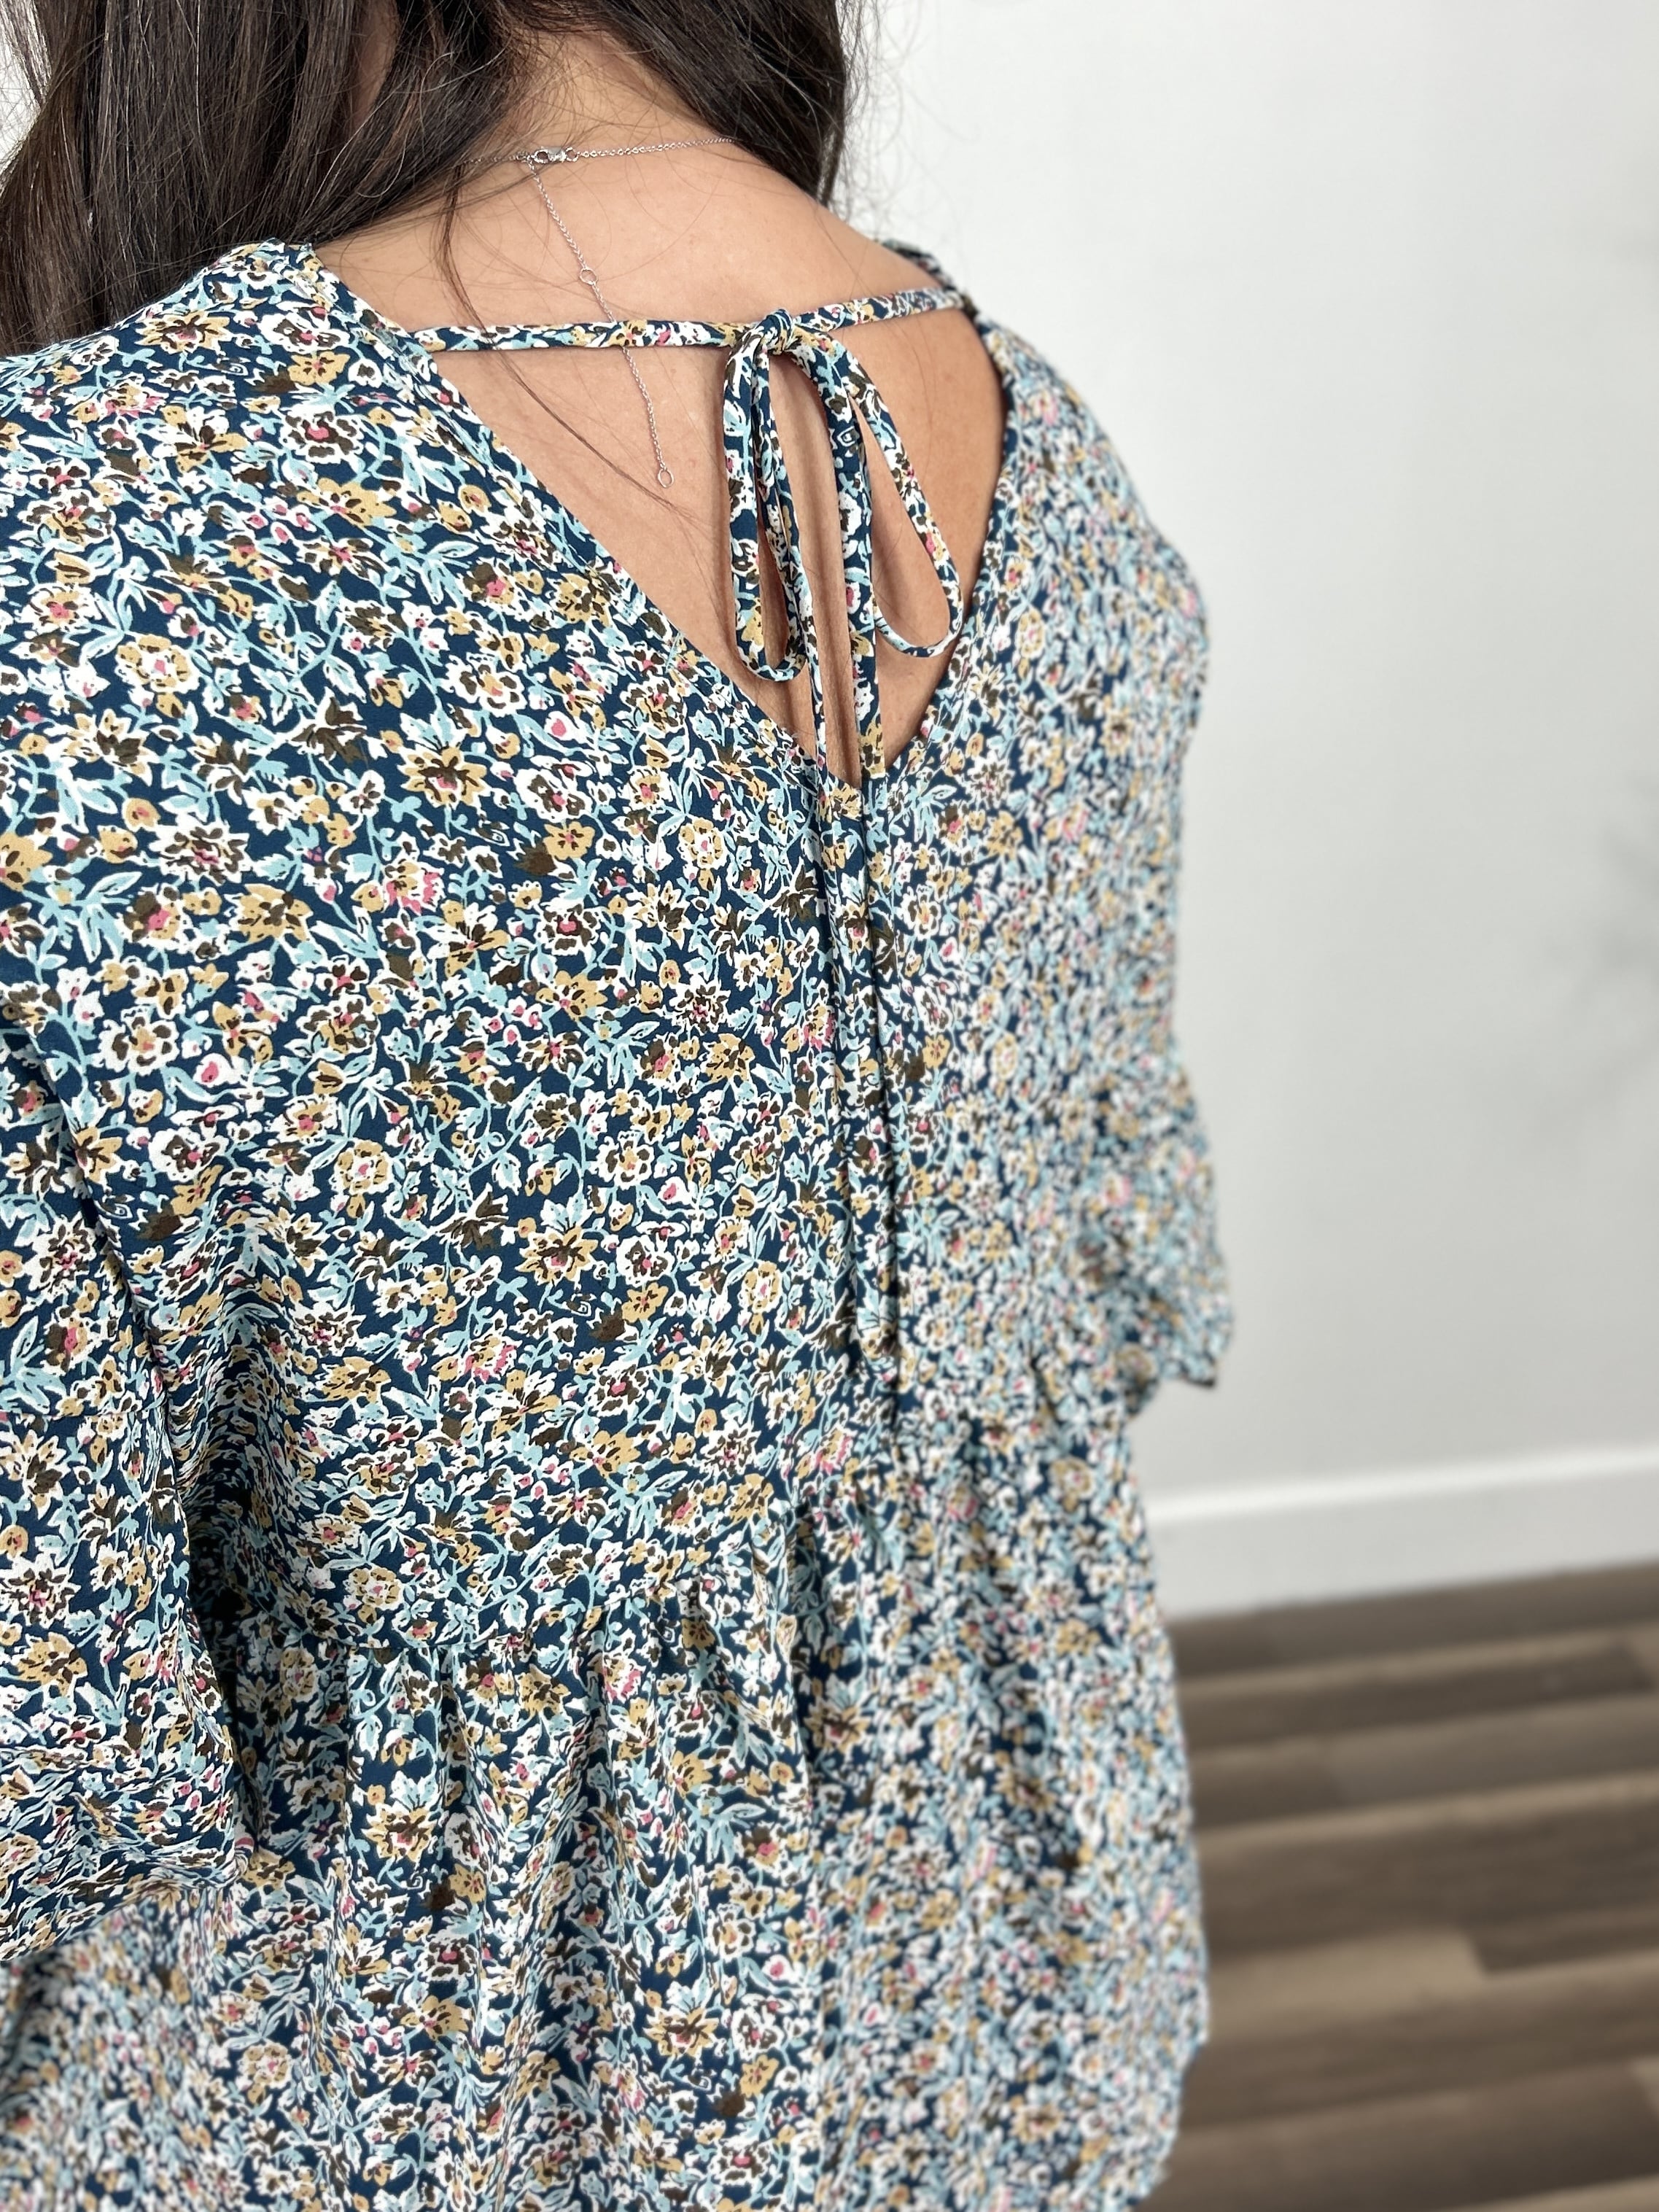 detailed view of the back of the women's floral top with a back v dip and a adjustable tie.